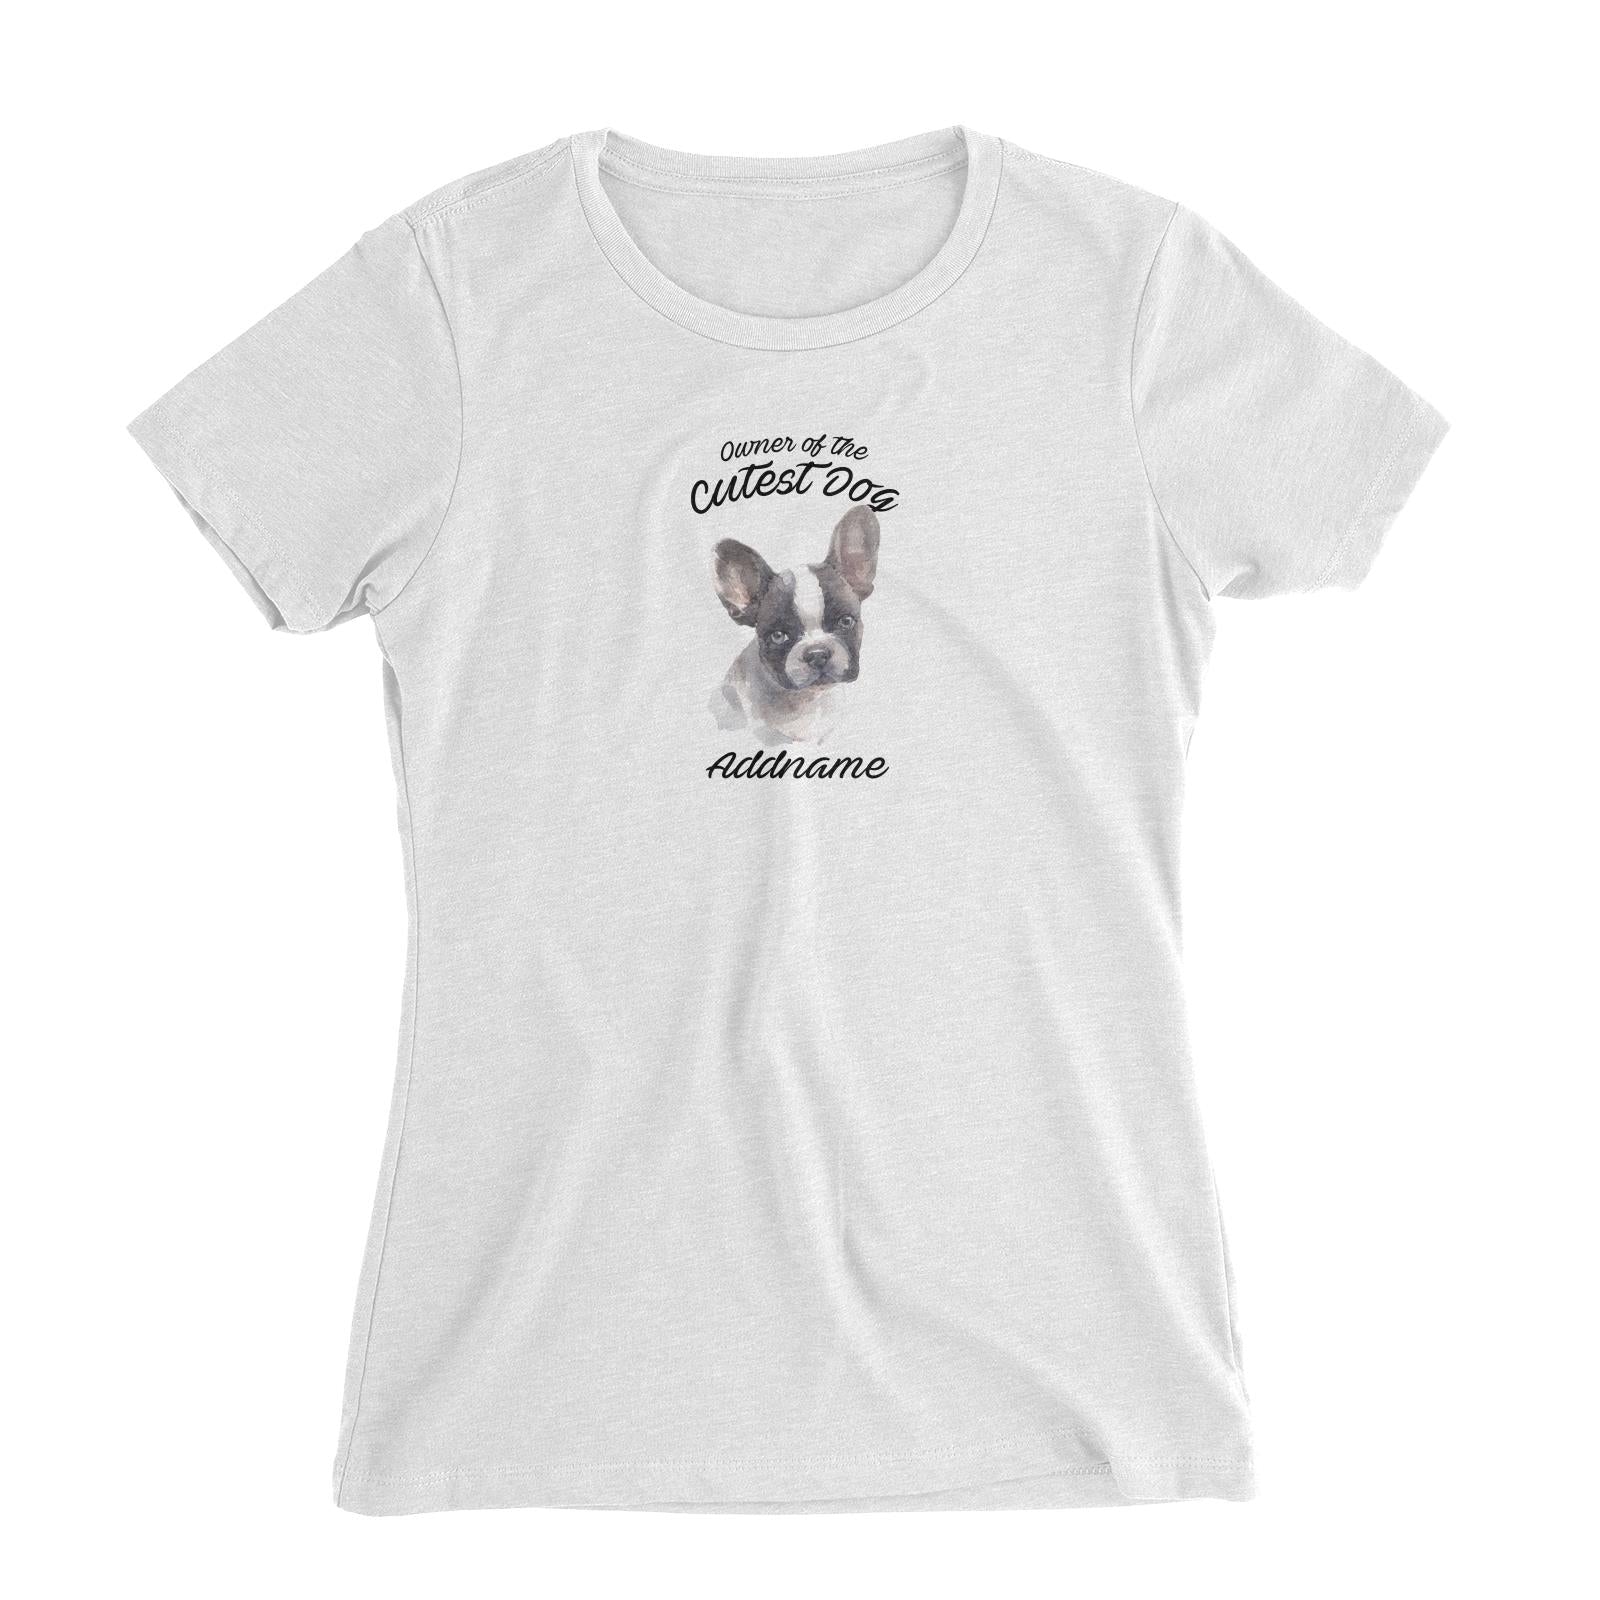 Watercolor Dog Owner Of The Cutest Dog French Bulldog Frown Addname Women's Slim Fit T-Shirt